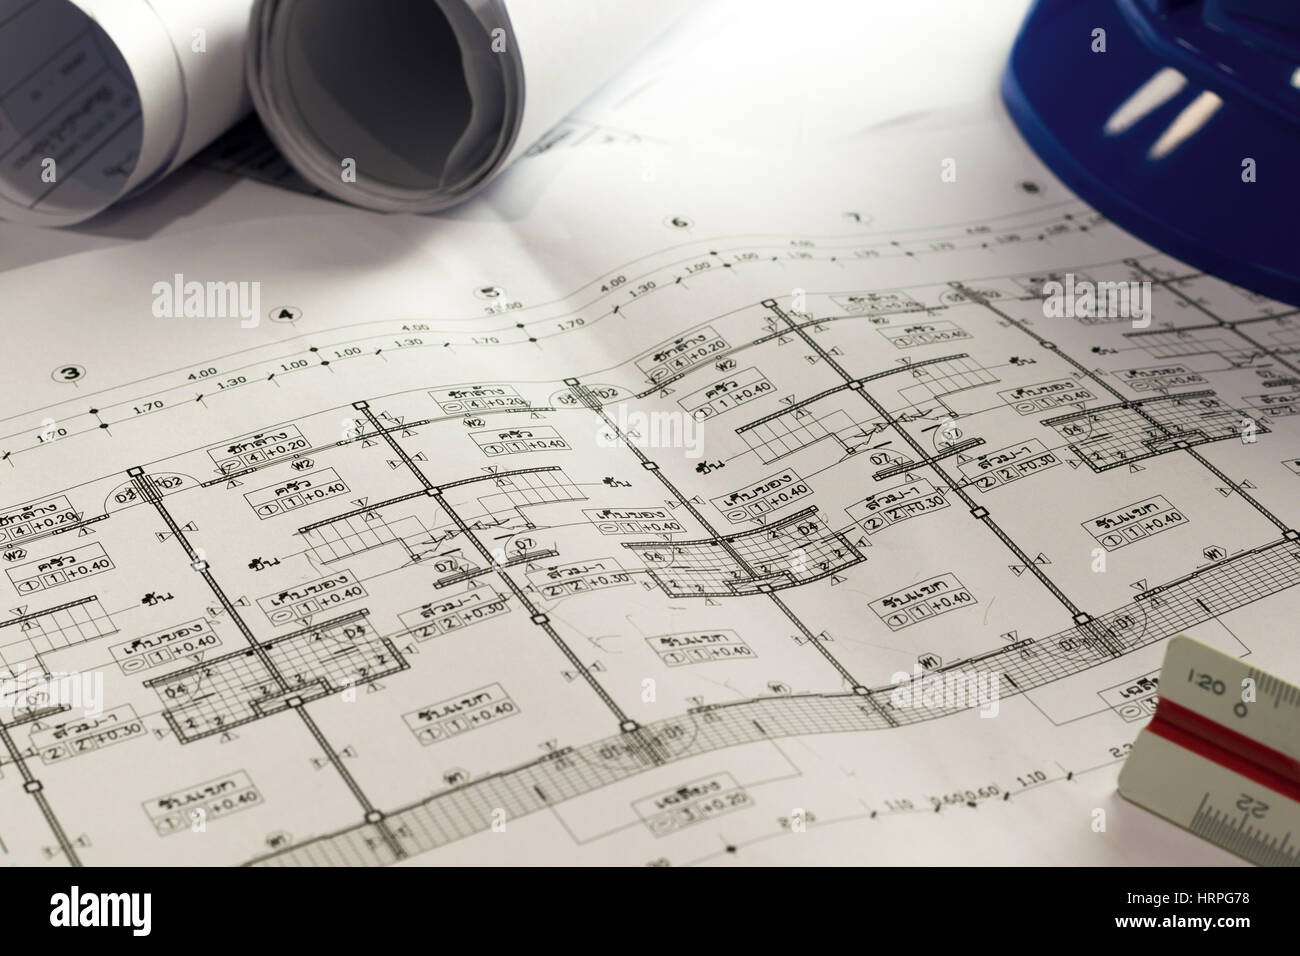 engineering diagram blueprint paper drafting project sketch architectural,selective focus Stock Photo